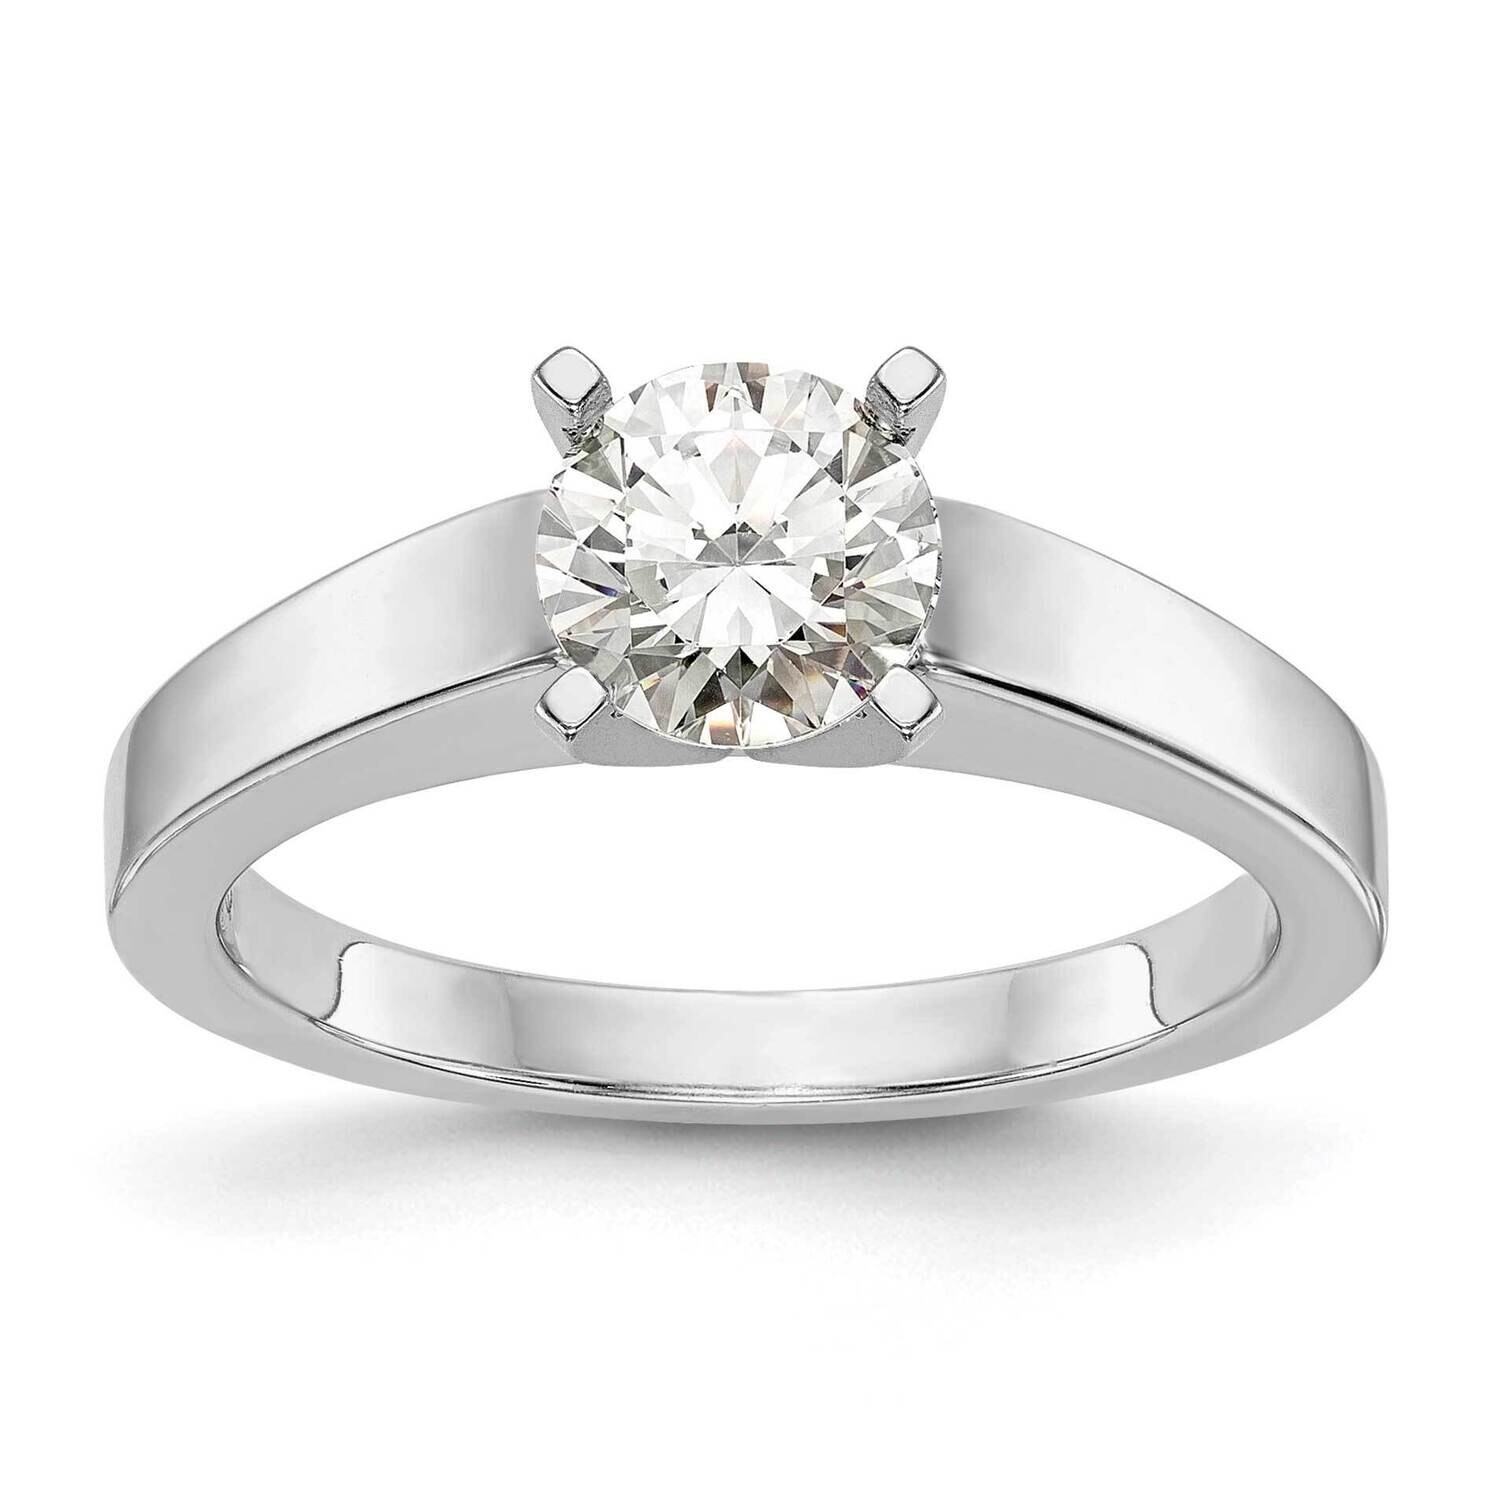 Peg Set 4.5mm Solitaire Engagement Ring Mounting 14k White Gold RM1983E-4.5MM-CWAA